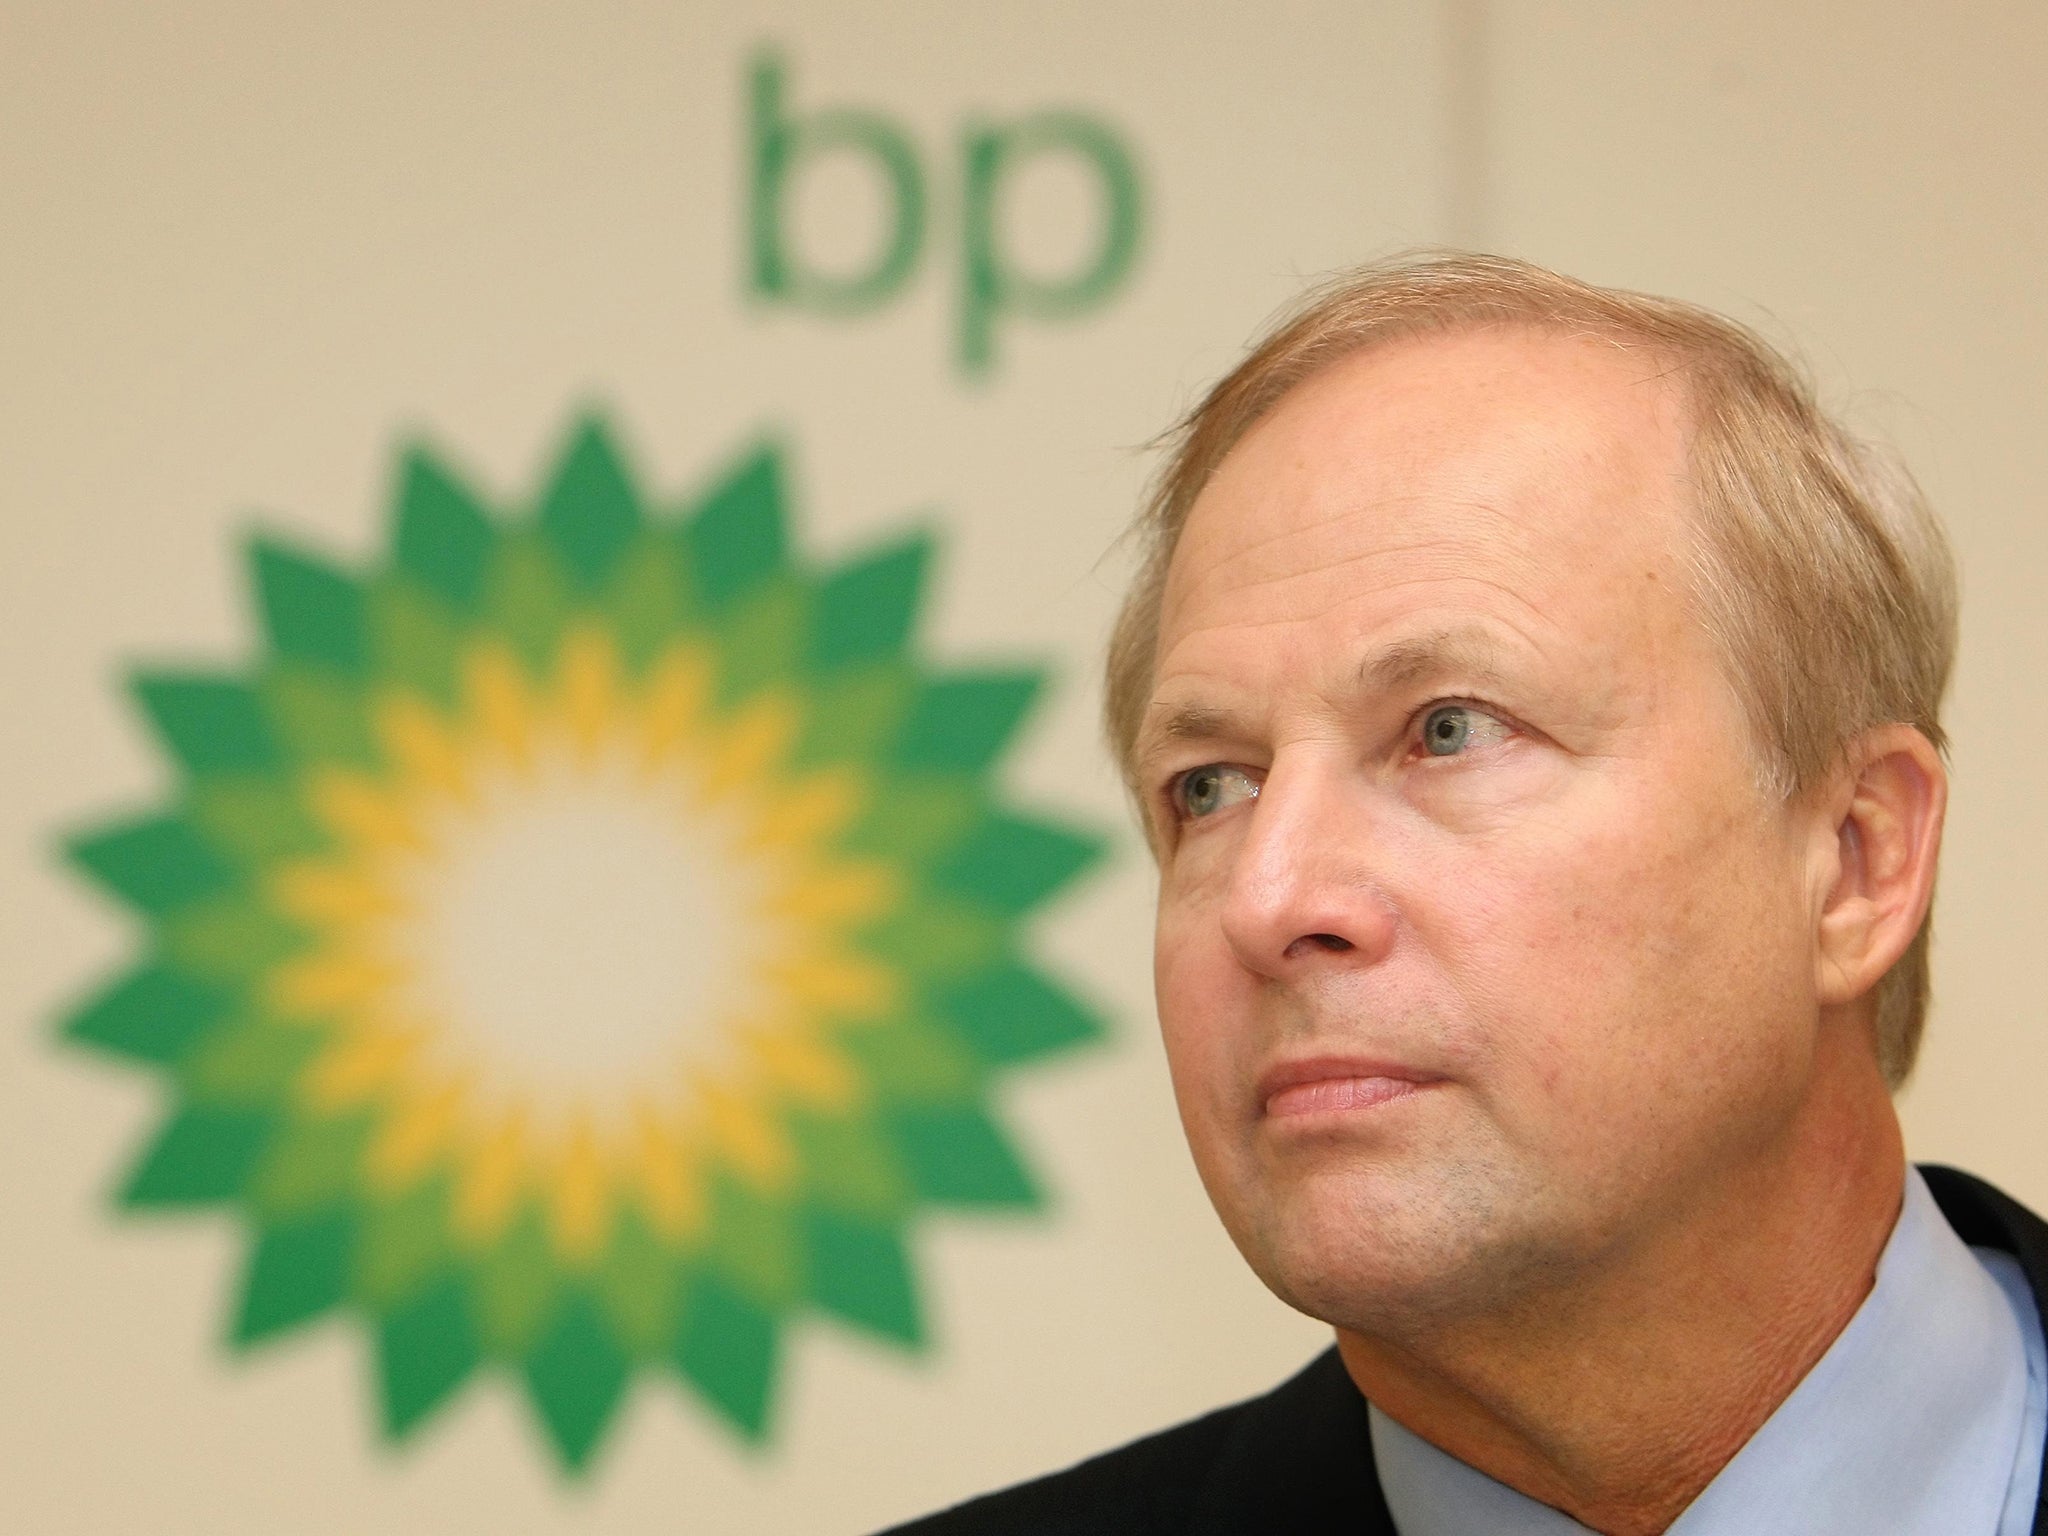 BP reduced chief executive Bob Dudley’s pay package by 40 per cent after a majority of shareholders voted down a proposed 20 per cent hike despite the company slumping to its largest annual loss for more than 20 years